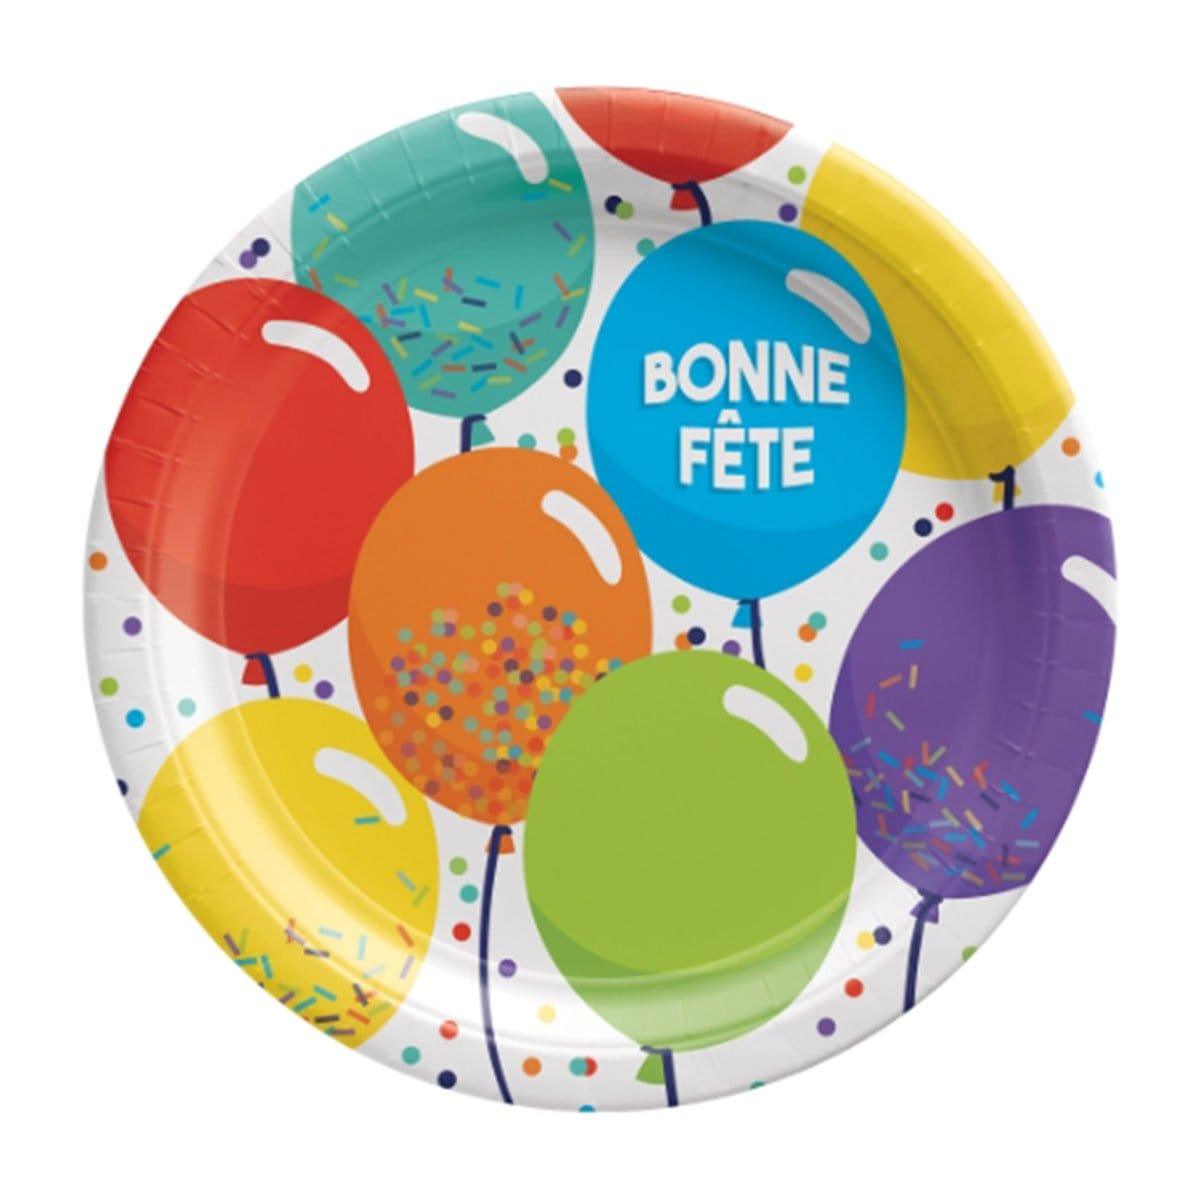 Buy General Birthday Bonne Fête Balloons - Plates 7 inches, 8 Count sold at Party Expert